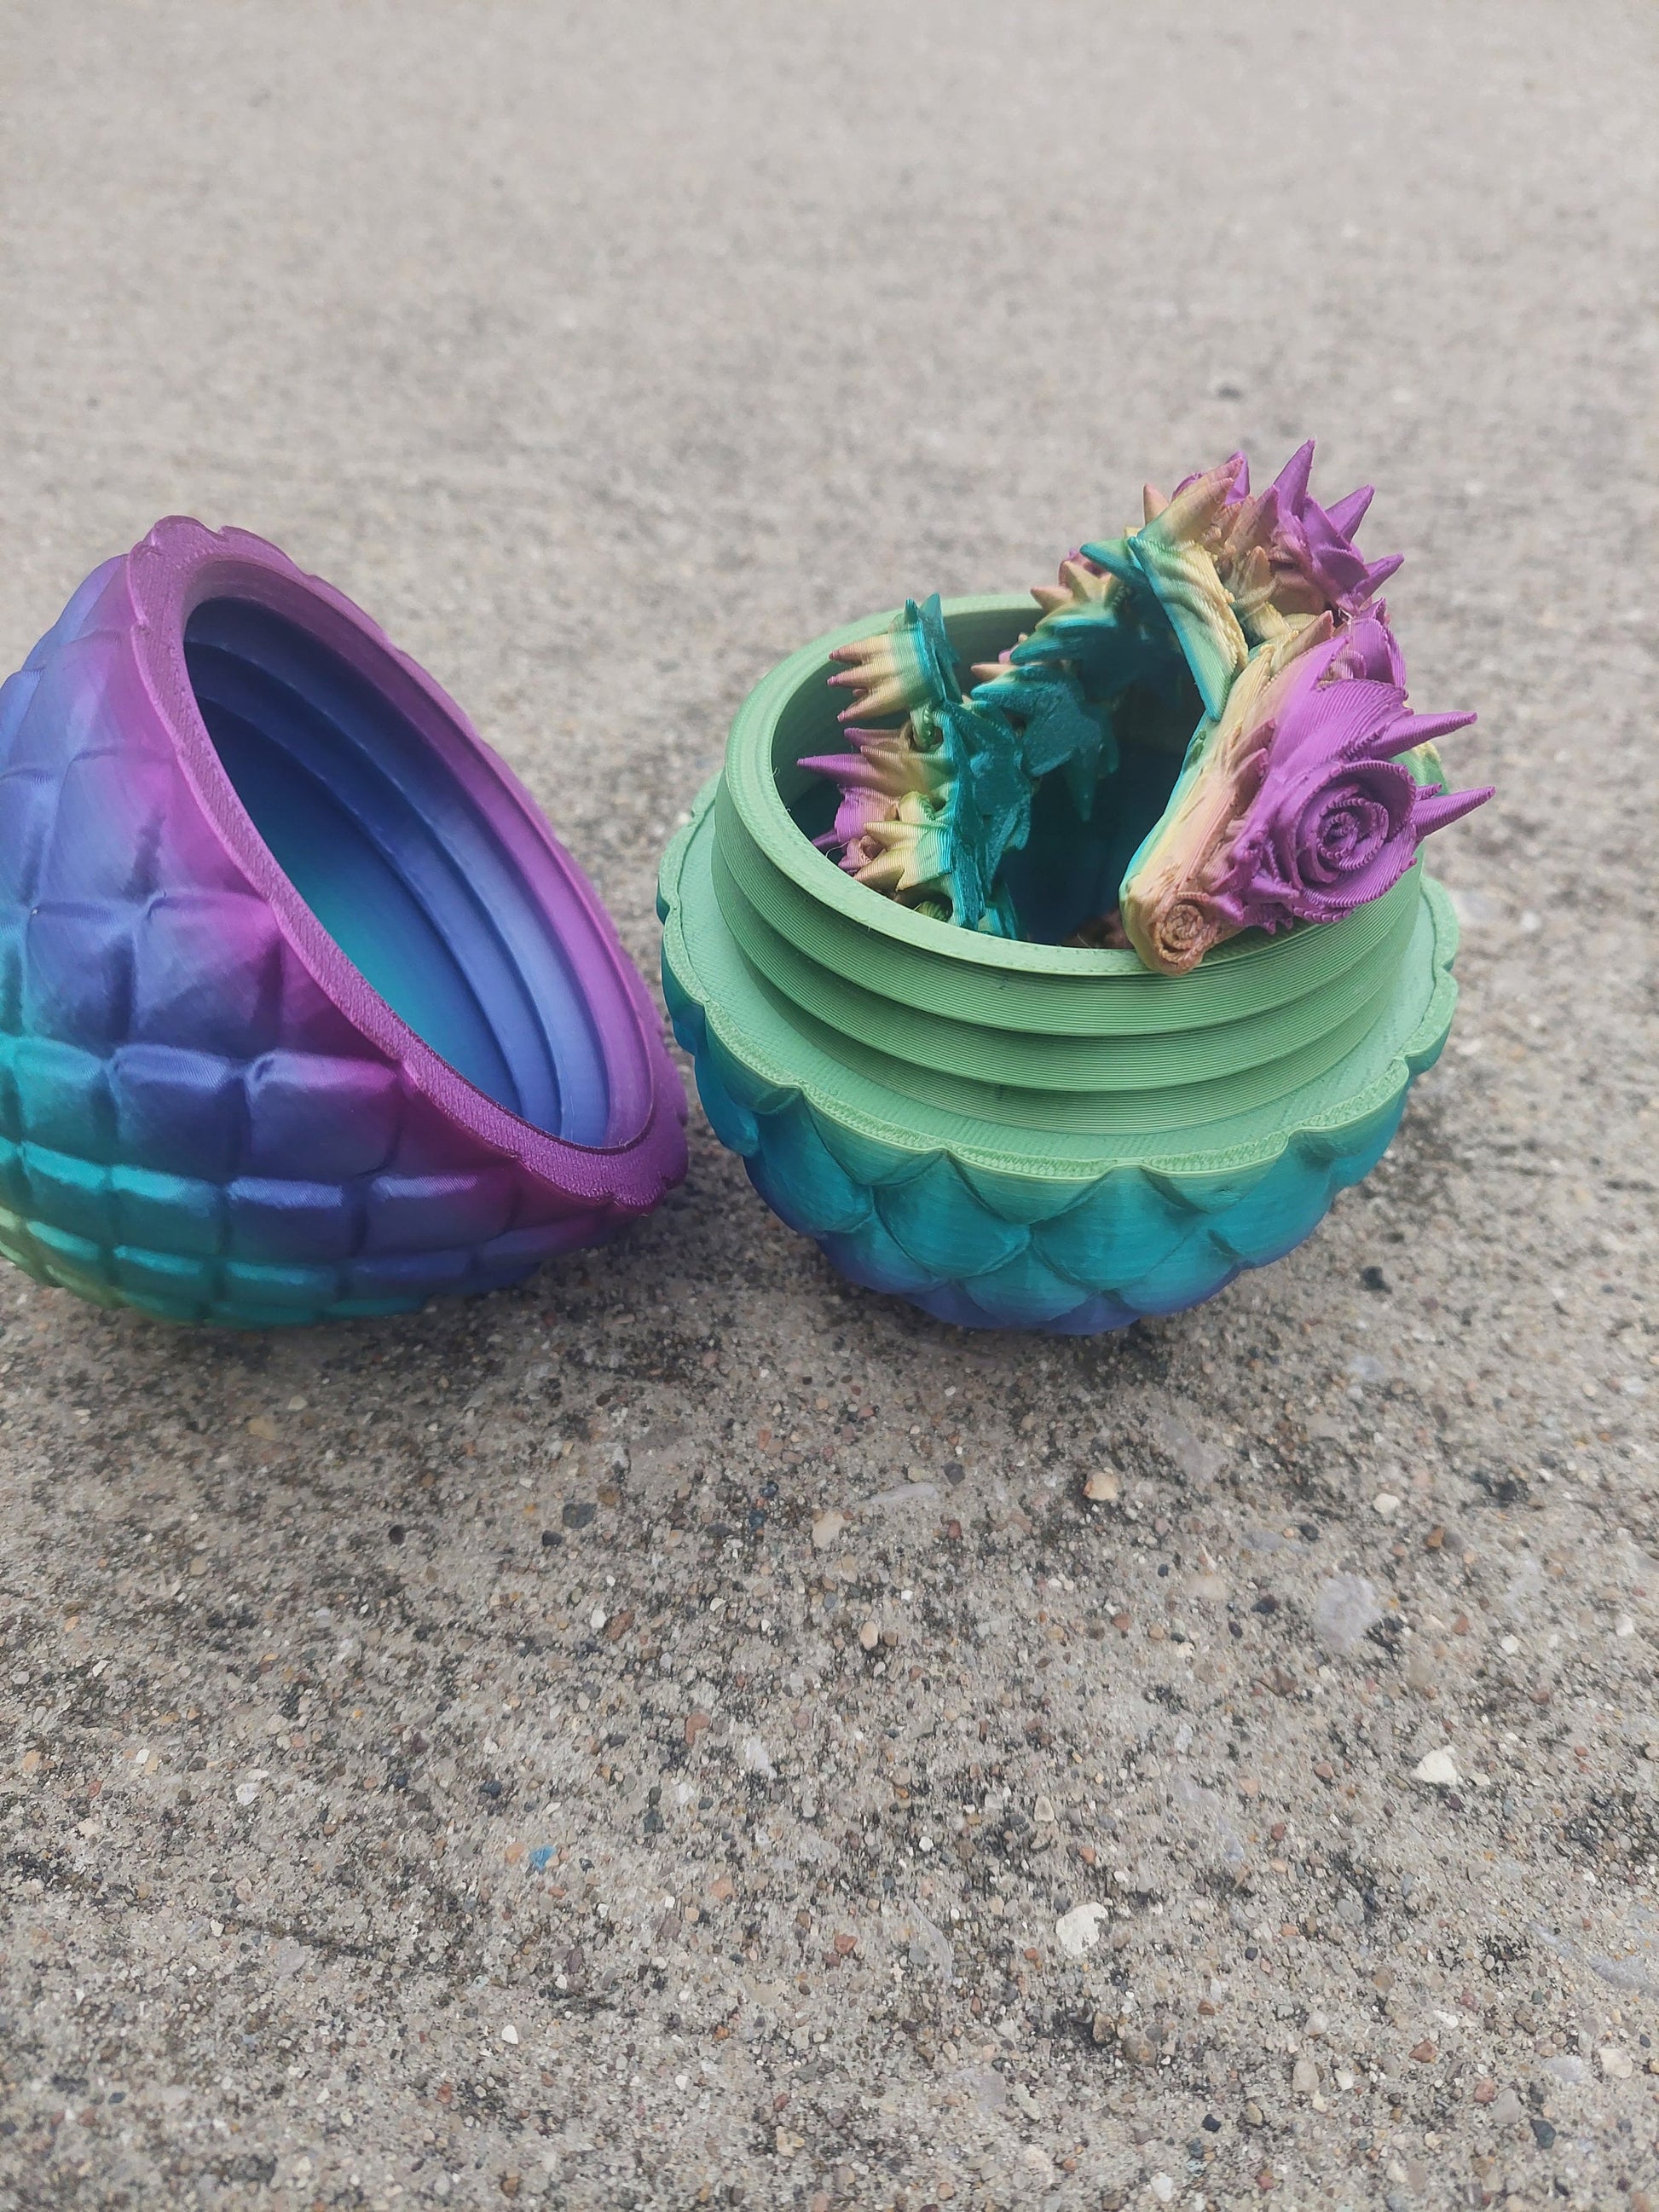 Mystery Dragon Eggs - Articulated Dragons - 3 Different Eggs - 7 Different Dragons - ~12 Inches